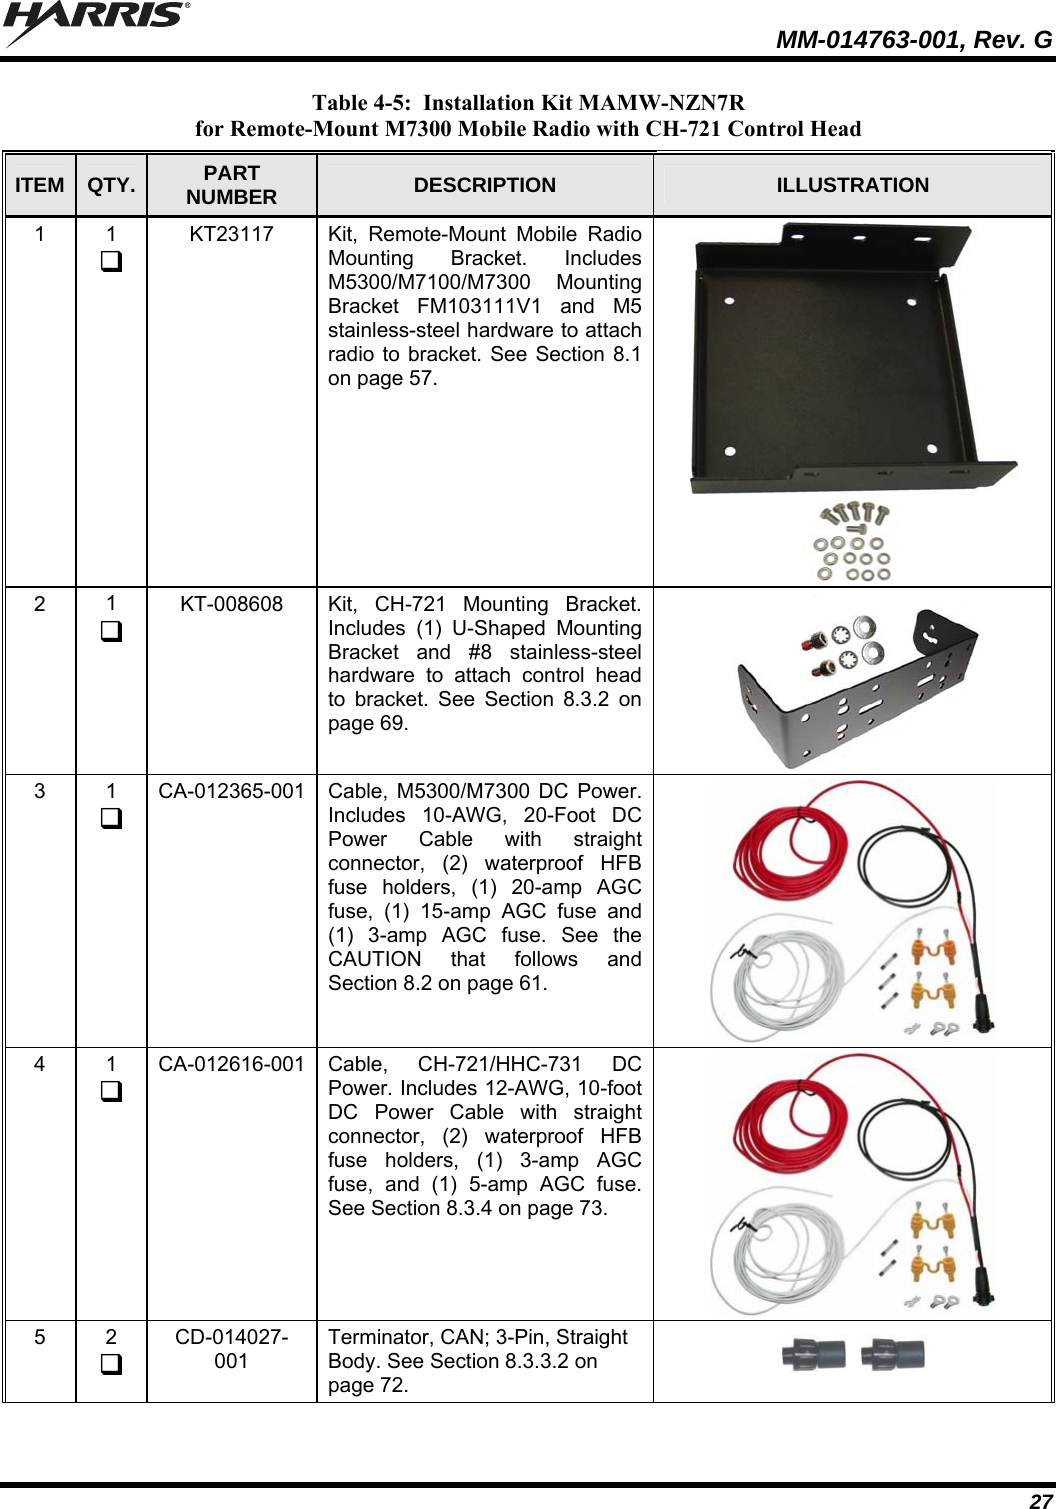   MM-014763-001, Rev. G 27 Table 4-5:  Installation Kit MAMW-NZN7R for Remote-Mount M7300 Mobile Radio with CH-721 Control Head ITEM  QTY.  PART NUMBER  DESCRIPTION  ILLUSTRATION 1  1  KT23117  Kit, Remote-Mount Mobile Radio Mounting Bracket. Includes M5300/M7100/M7300 Mounting Bracket FM103111V1 and M5 stainless-steel hardware to attach radio to bracket. See Section 8.1 on page 57.  2  1  KT-008608  Kit, CH-721 Mounting Bracket. Includes (1) U-Shaped Mounting Bracket and #8 stainless-steel hardware to attach control head to bracket. See Section 8.3.2 on page 69.  3  1  CA-012365-001  Cable, M5300/M7300 DC Power. Includes 10-AWG, 20-Foot DC Power Cable with straight connector, (2) waterproof HFB fuse holders, (1) 20-amp AGC fuse, (1) 15-amp AGC fuse and (1) 3-amp AGC fuse. See the CAUTION that follows and Section 8.2 on page 61.  4  1  CA-012616-001  Cable, CH-721/HHC-731 DC Power. Includes 12-AWG, 10-foot DC Power Cable with straight connector, (2) waterproof HFB fuse holders, (1) 3-amp AGC fuse, and (1) 5-amp AGC fuse. See Section 8.3.4 on page 73.  5  2  CD-014027-001 Terminator, CAN; 3-Pin, Straight Body. See Section 8.3.3.2 on page 72.      